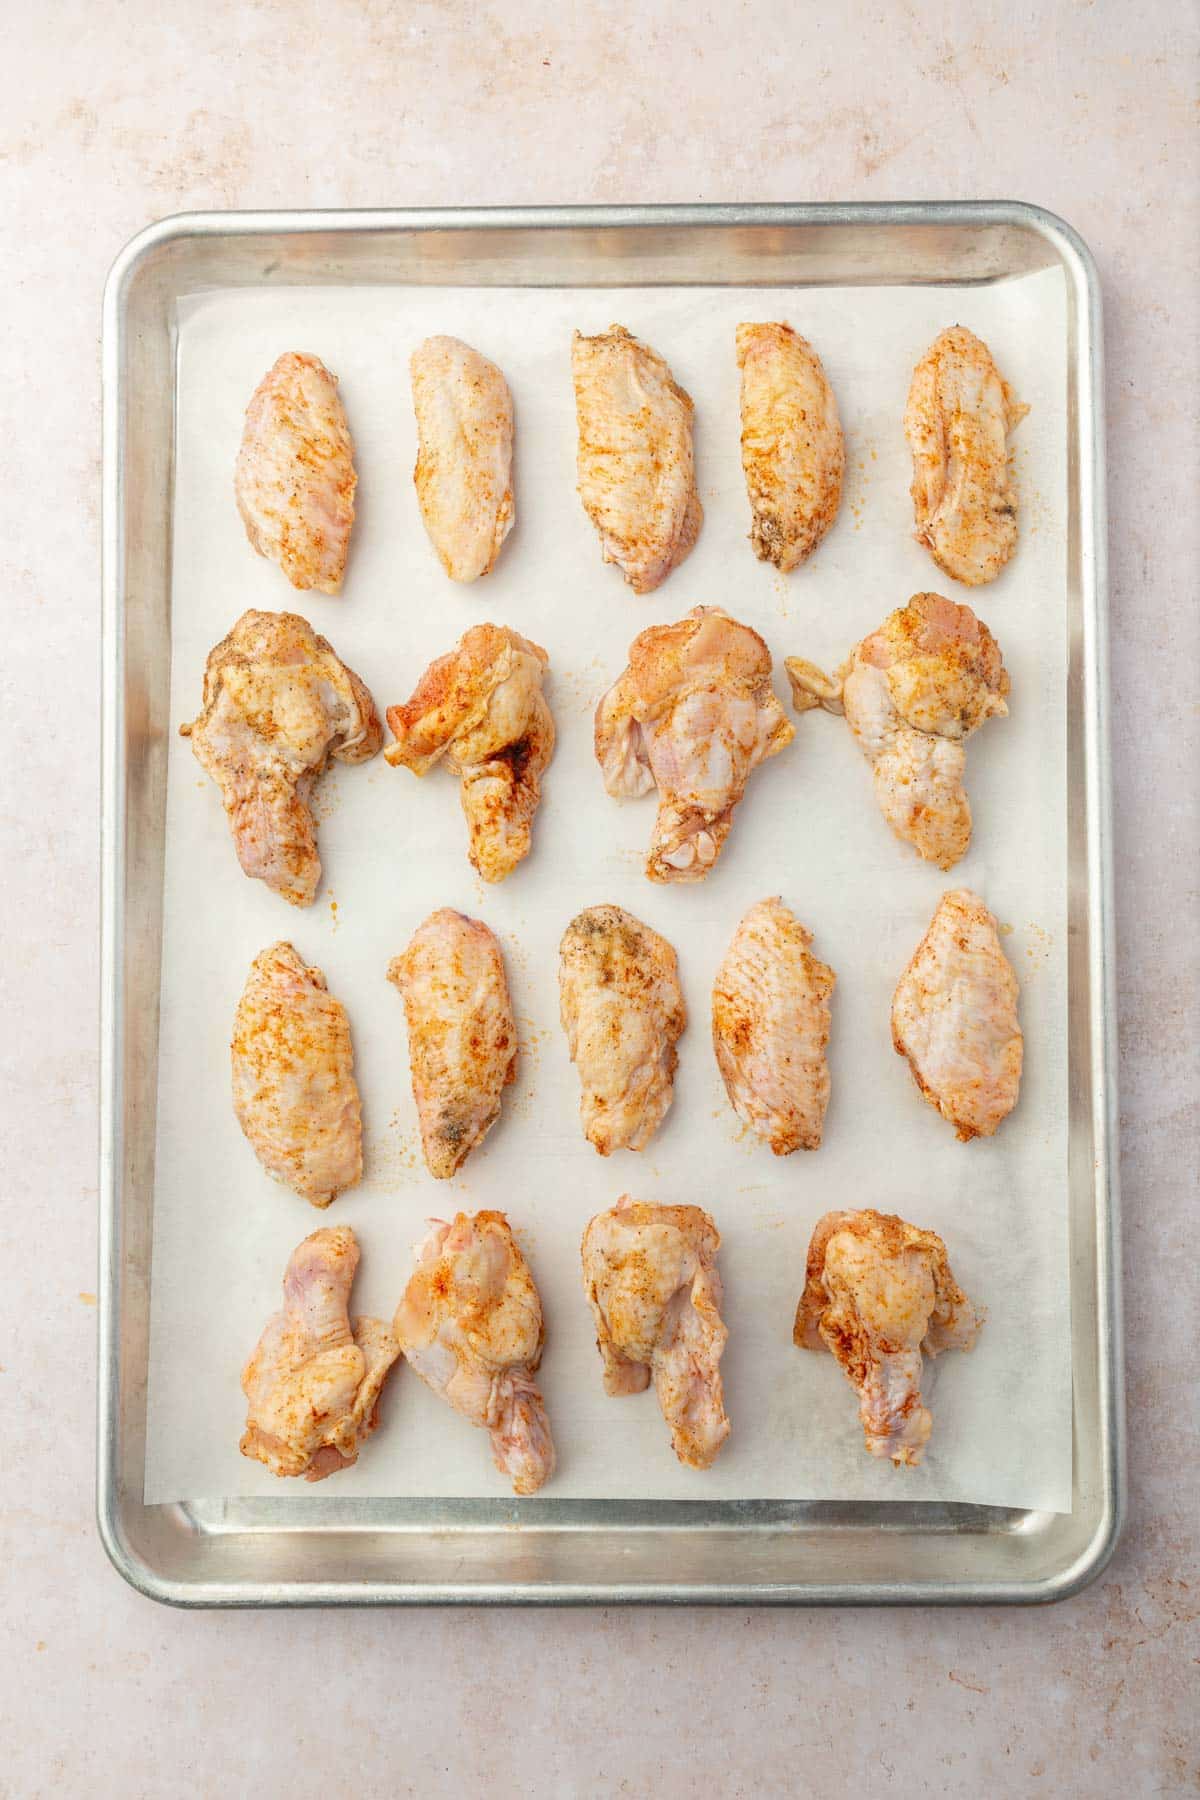 Raw chicken wings tossed in oil and spices on a parchment lined baking sheet.